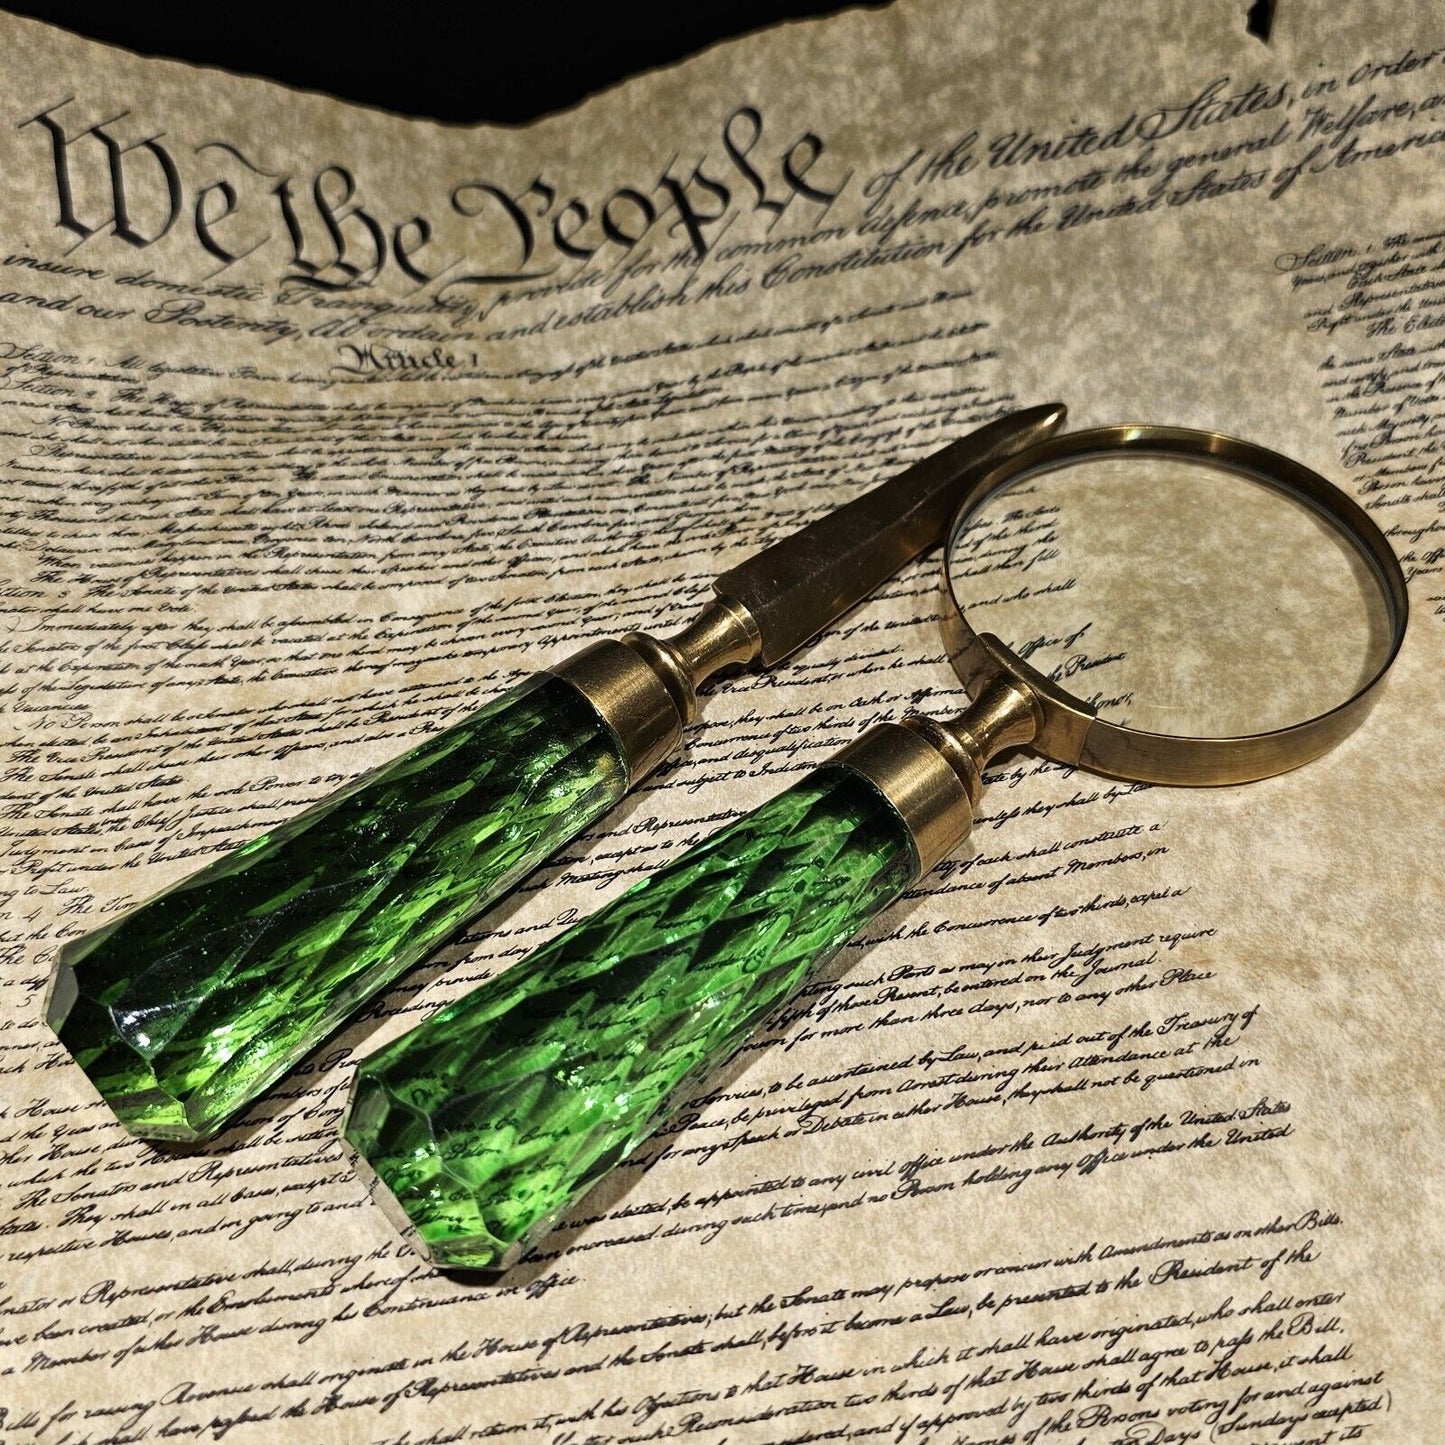 Antique Vintage Style Magnifying Glass Letter Opener Set w Green Glass Handles